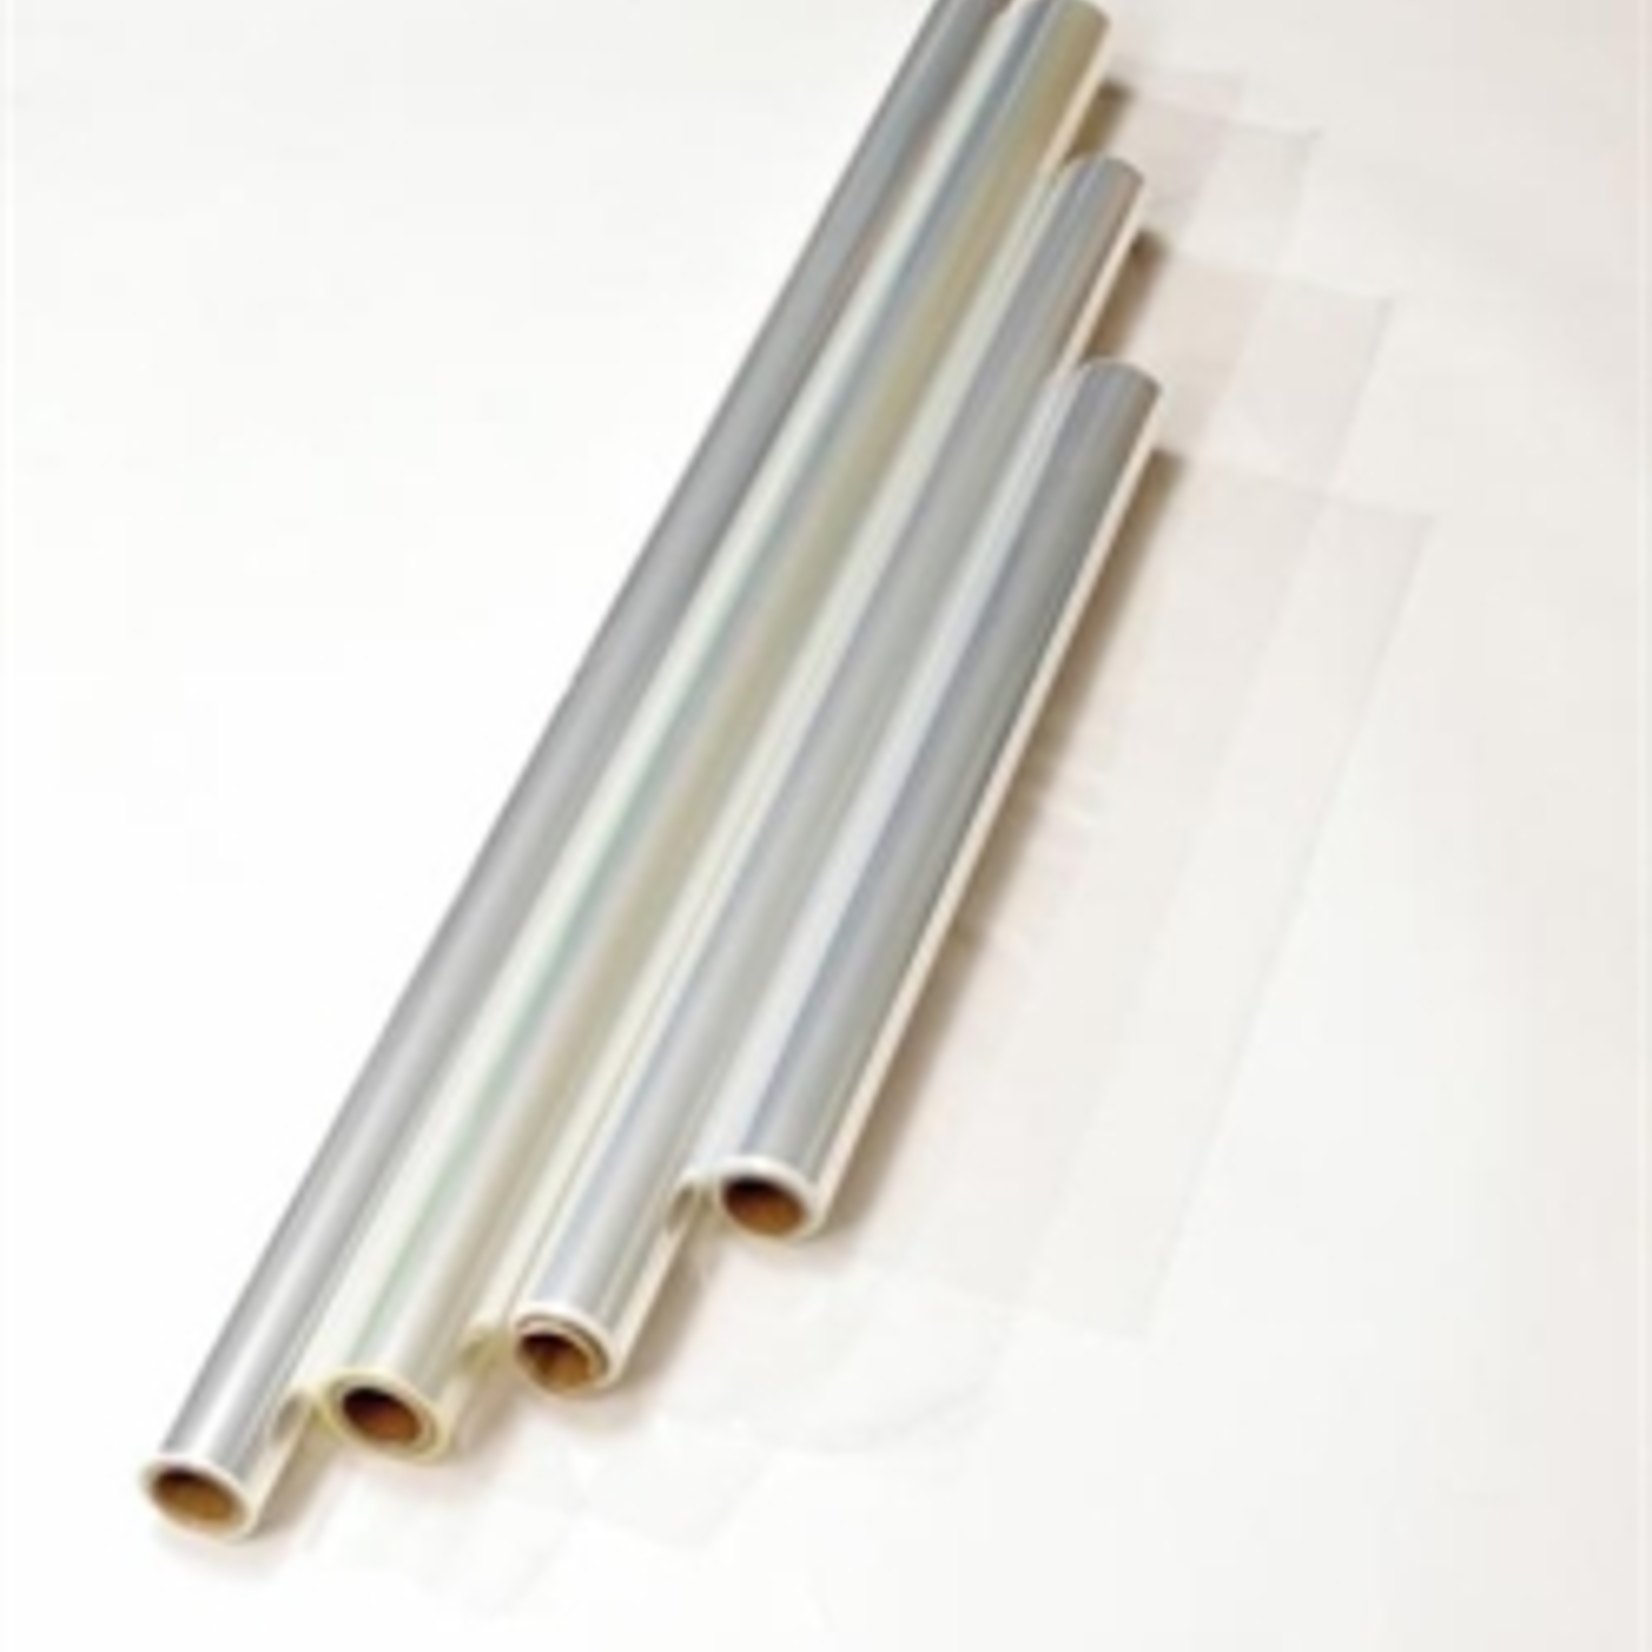 Cellophane Rolls 20"" x 100' clear